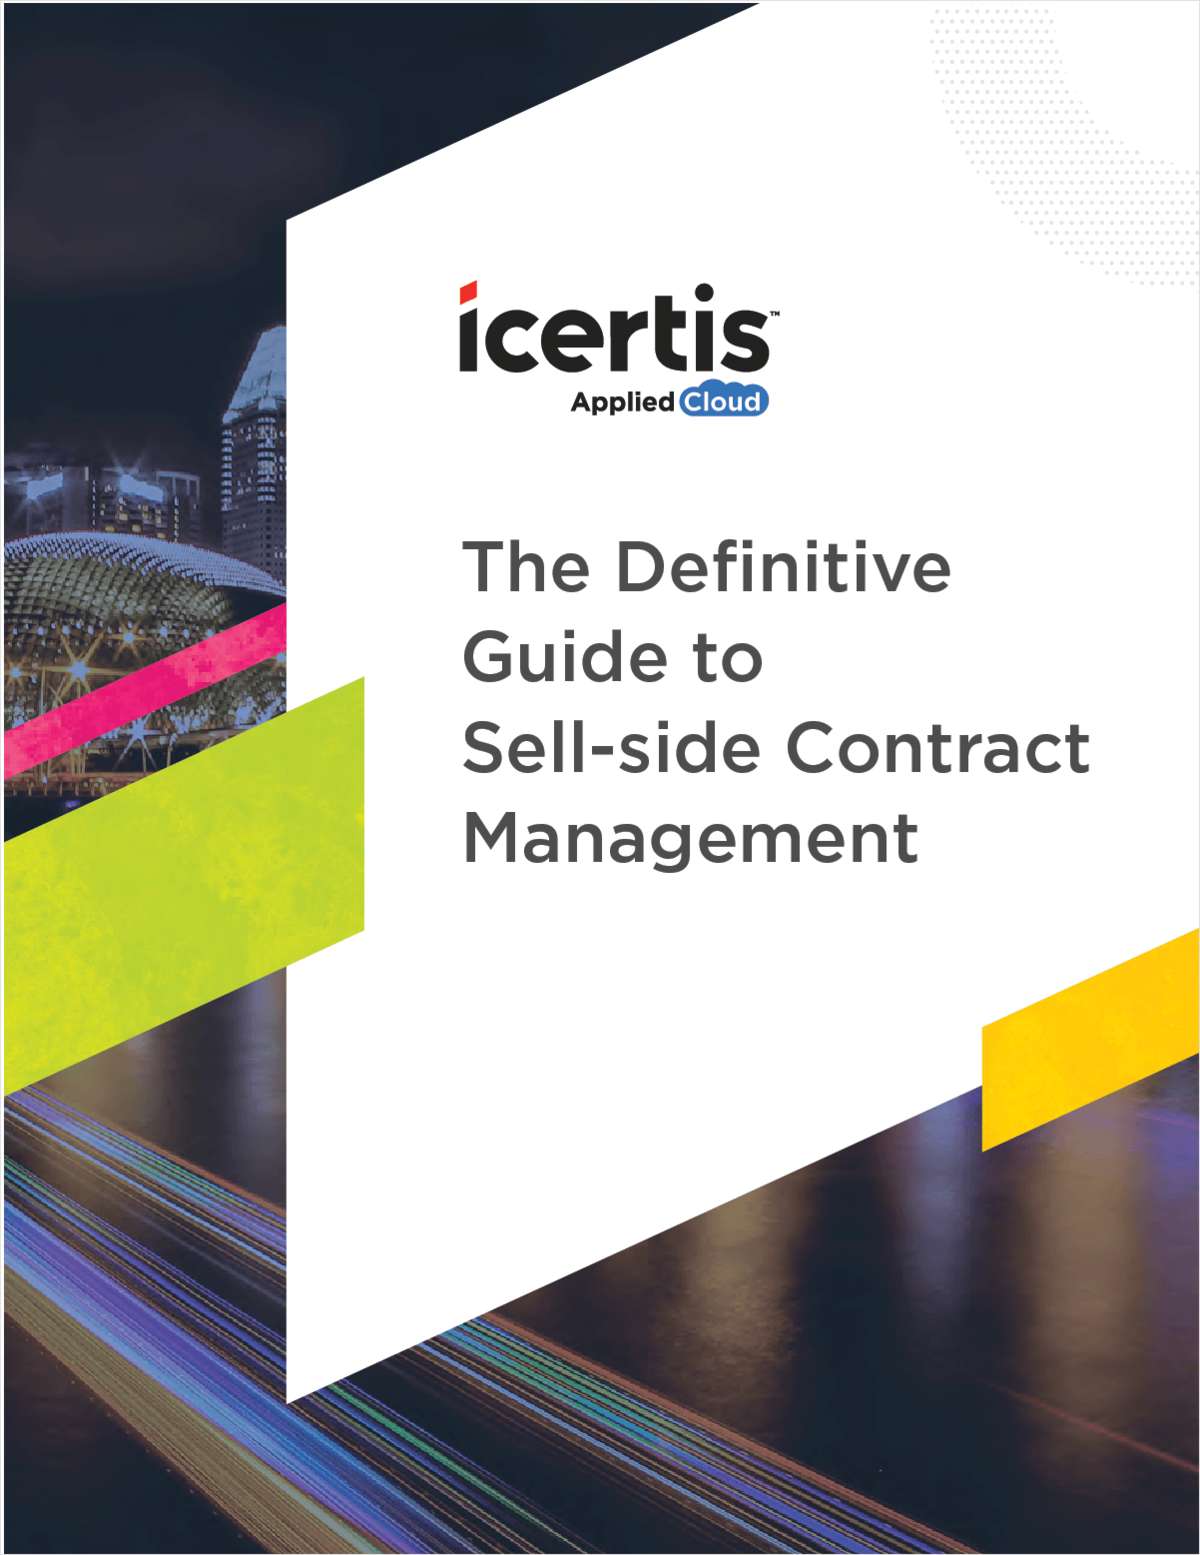 The Definitive Guide to Sell-Side Contracting